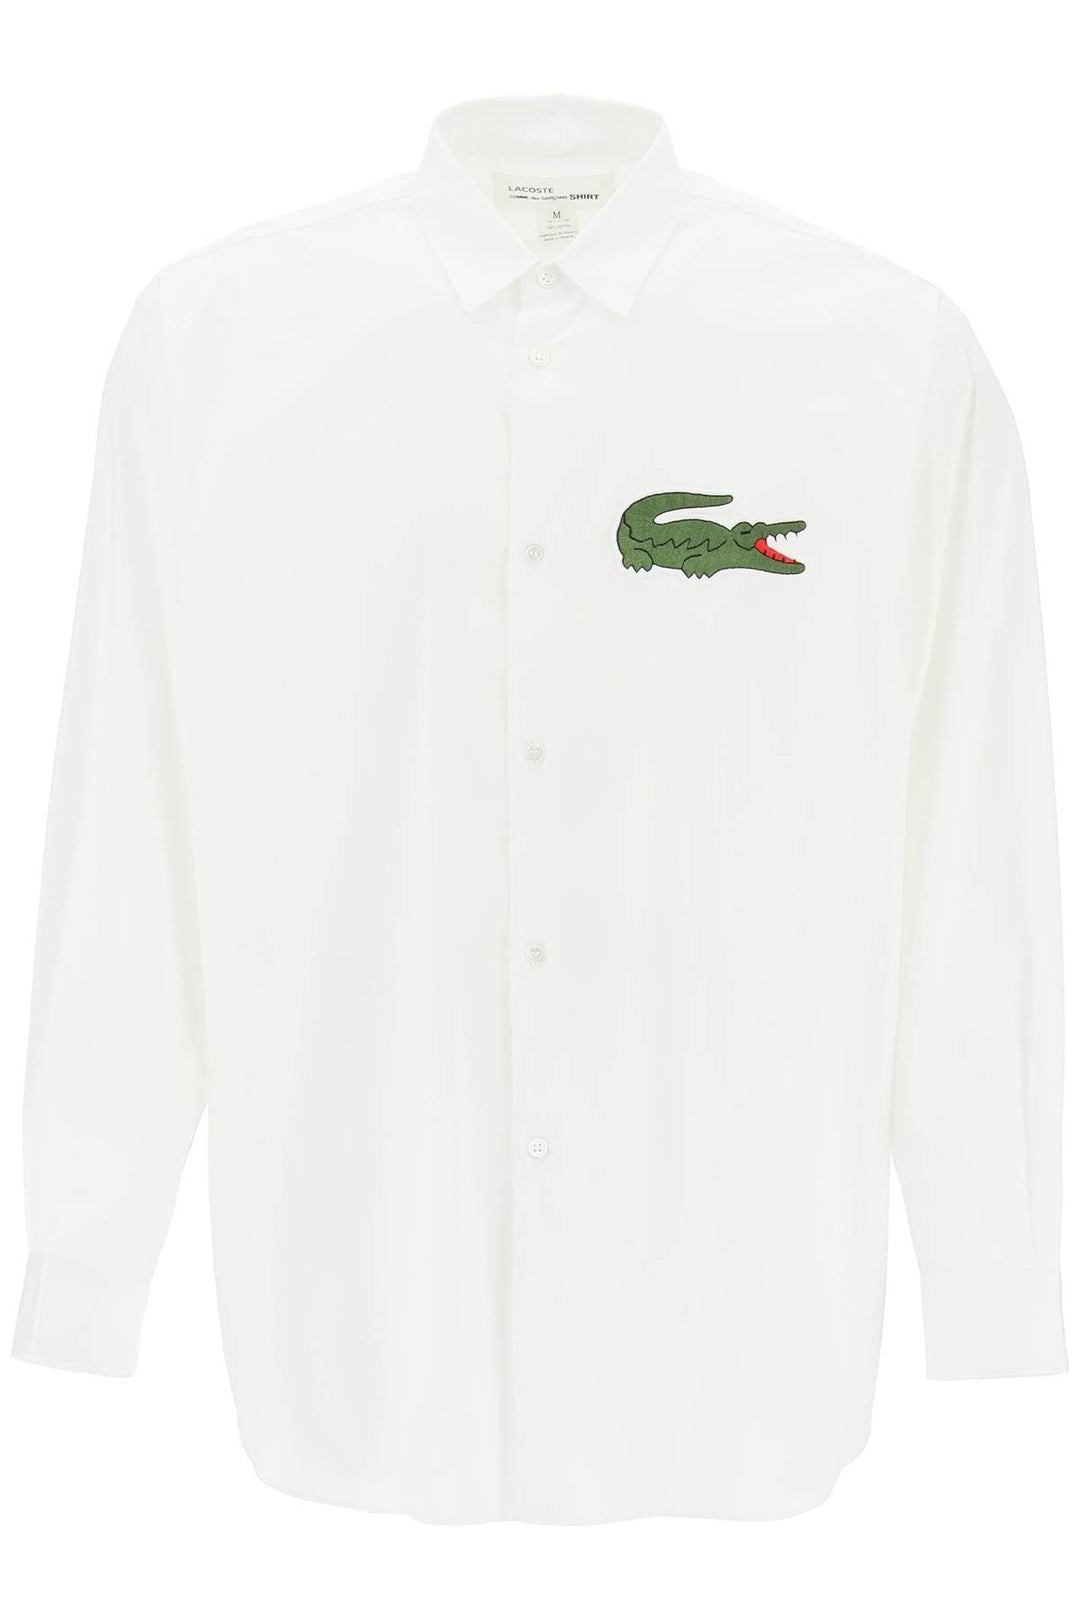 Comme des garcons shirt x lacoste oversized shirt with maxi patch-0